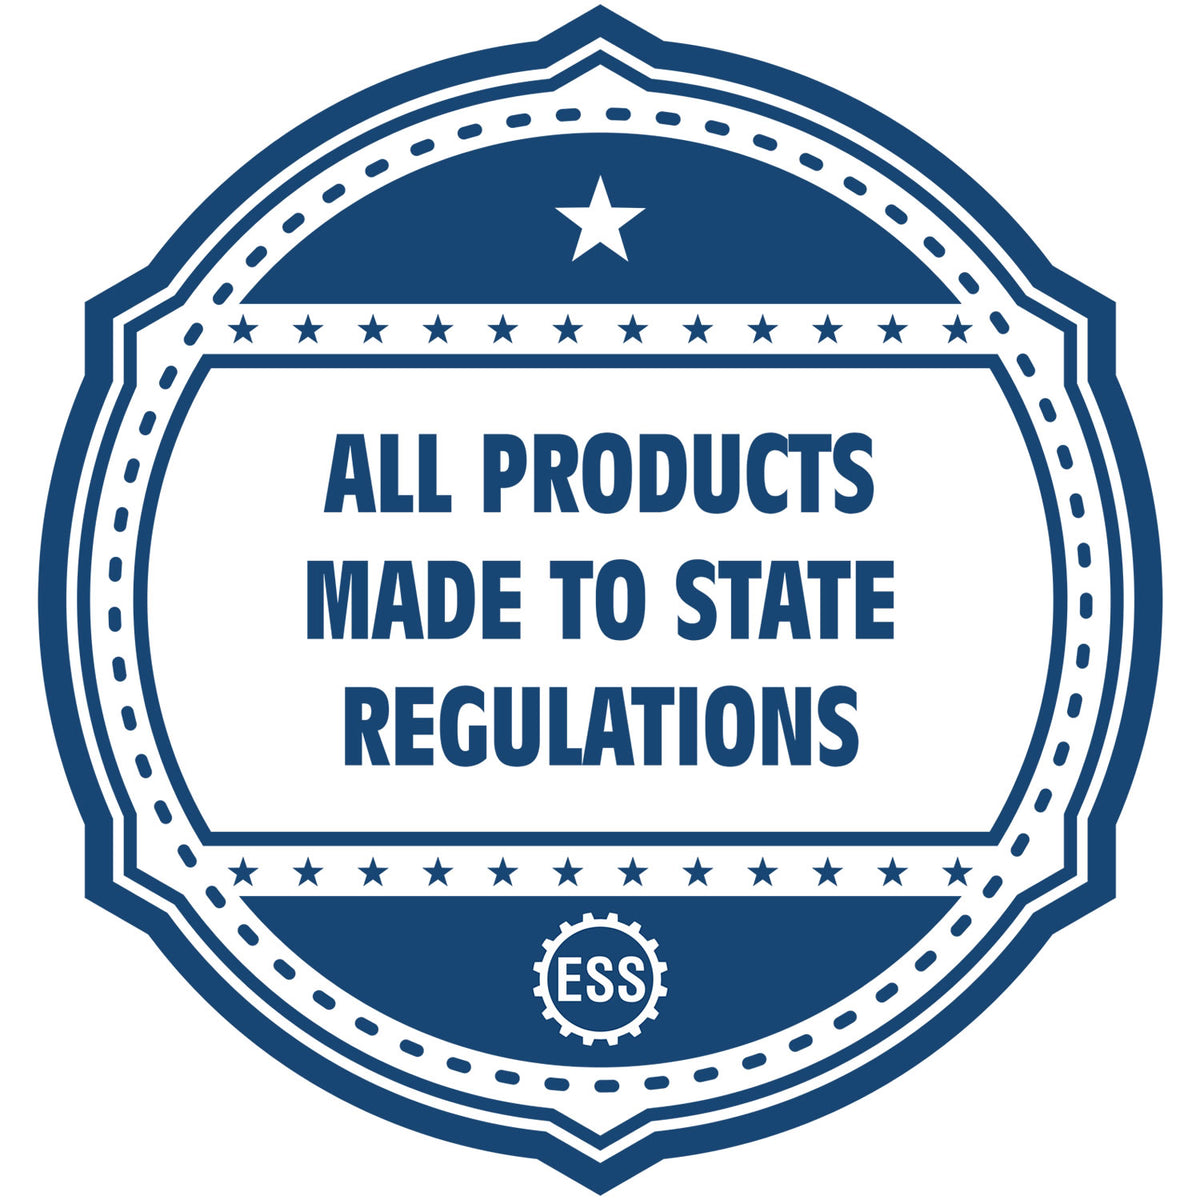 An icon or badge element for the Washington Professional Engineer Seal Stamp showing that this product is made in compliance with state regulations.